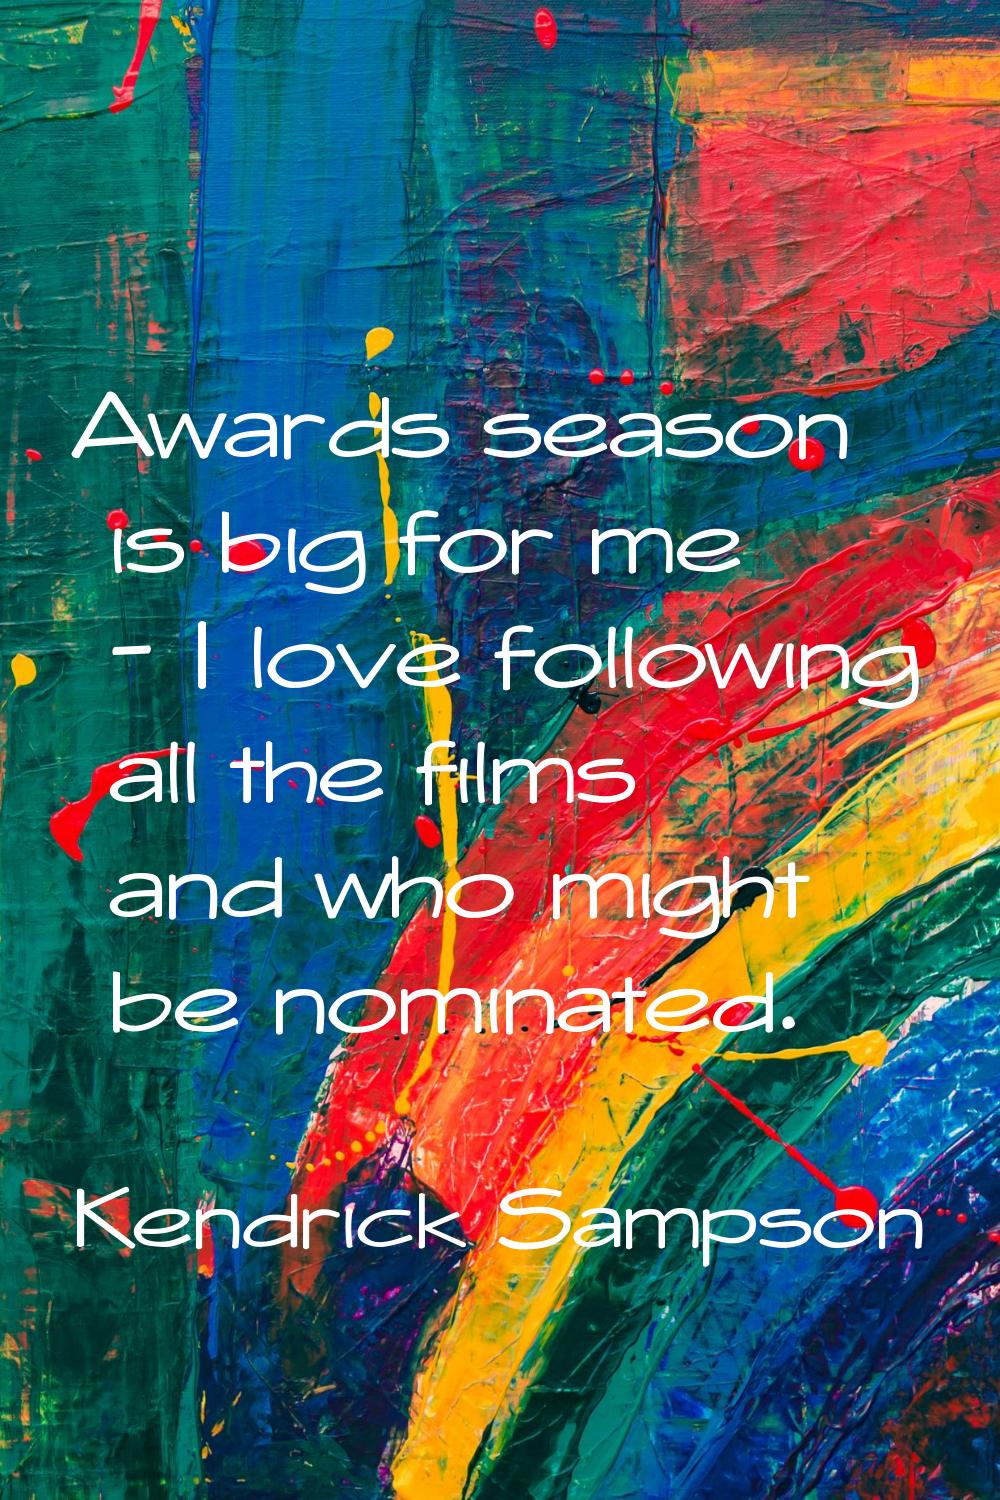 Awards season is big for me - I love following all the films and who might be nominated.